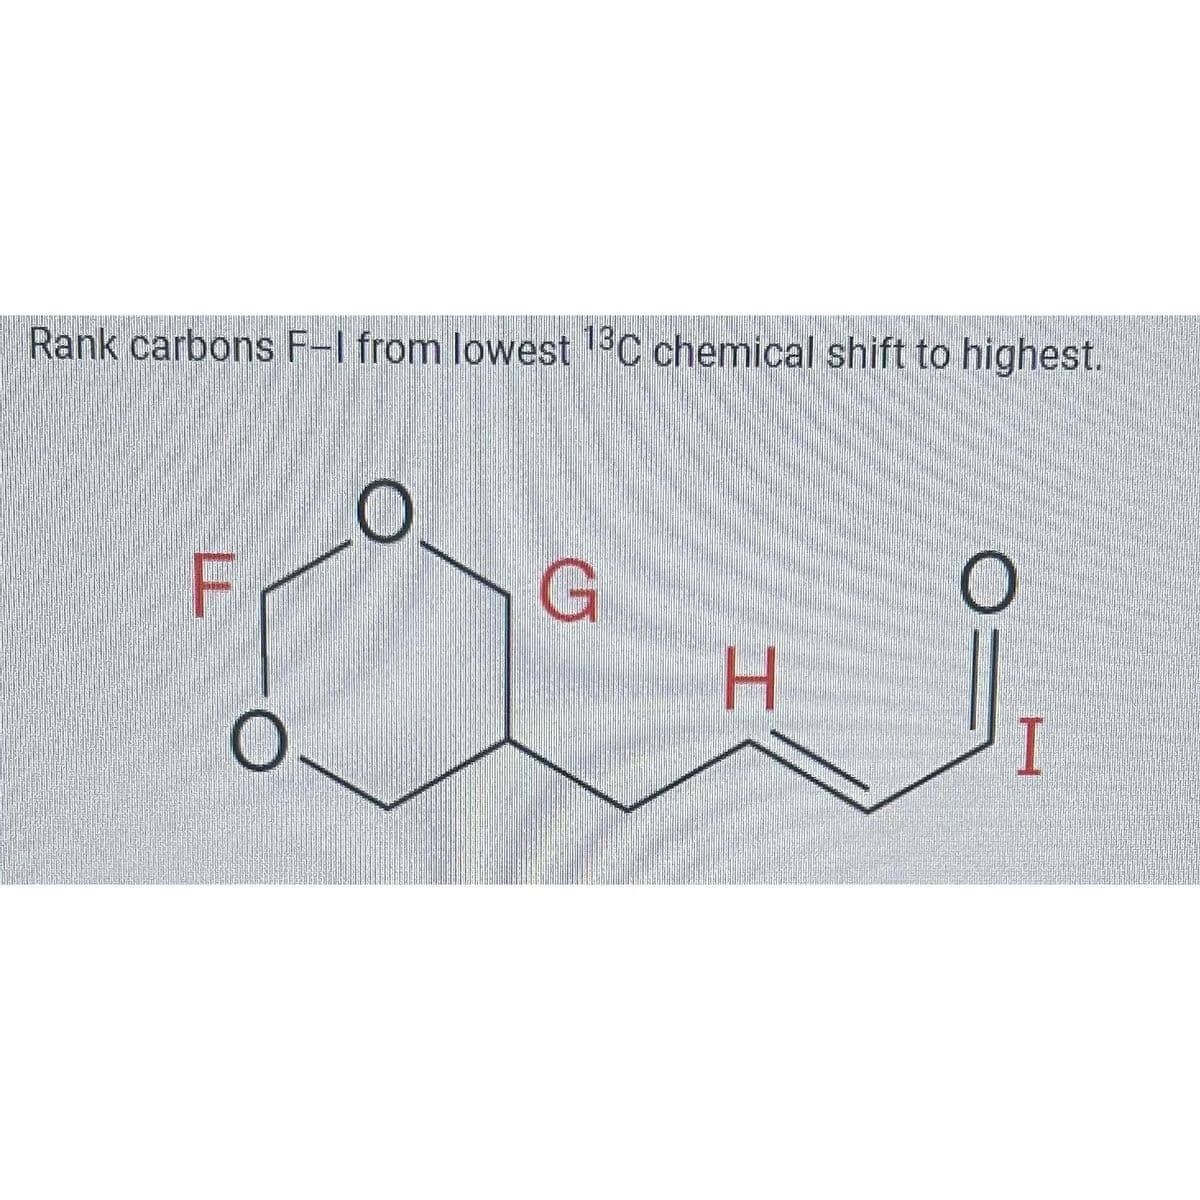 Rank carbons F-1 from lowest 13C chemical shift to highest.
TI
O
C
G
H
O
I